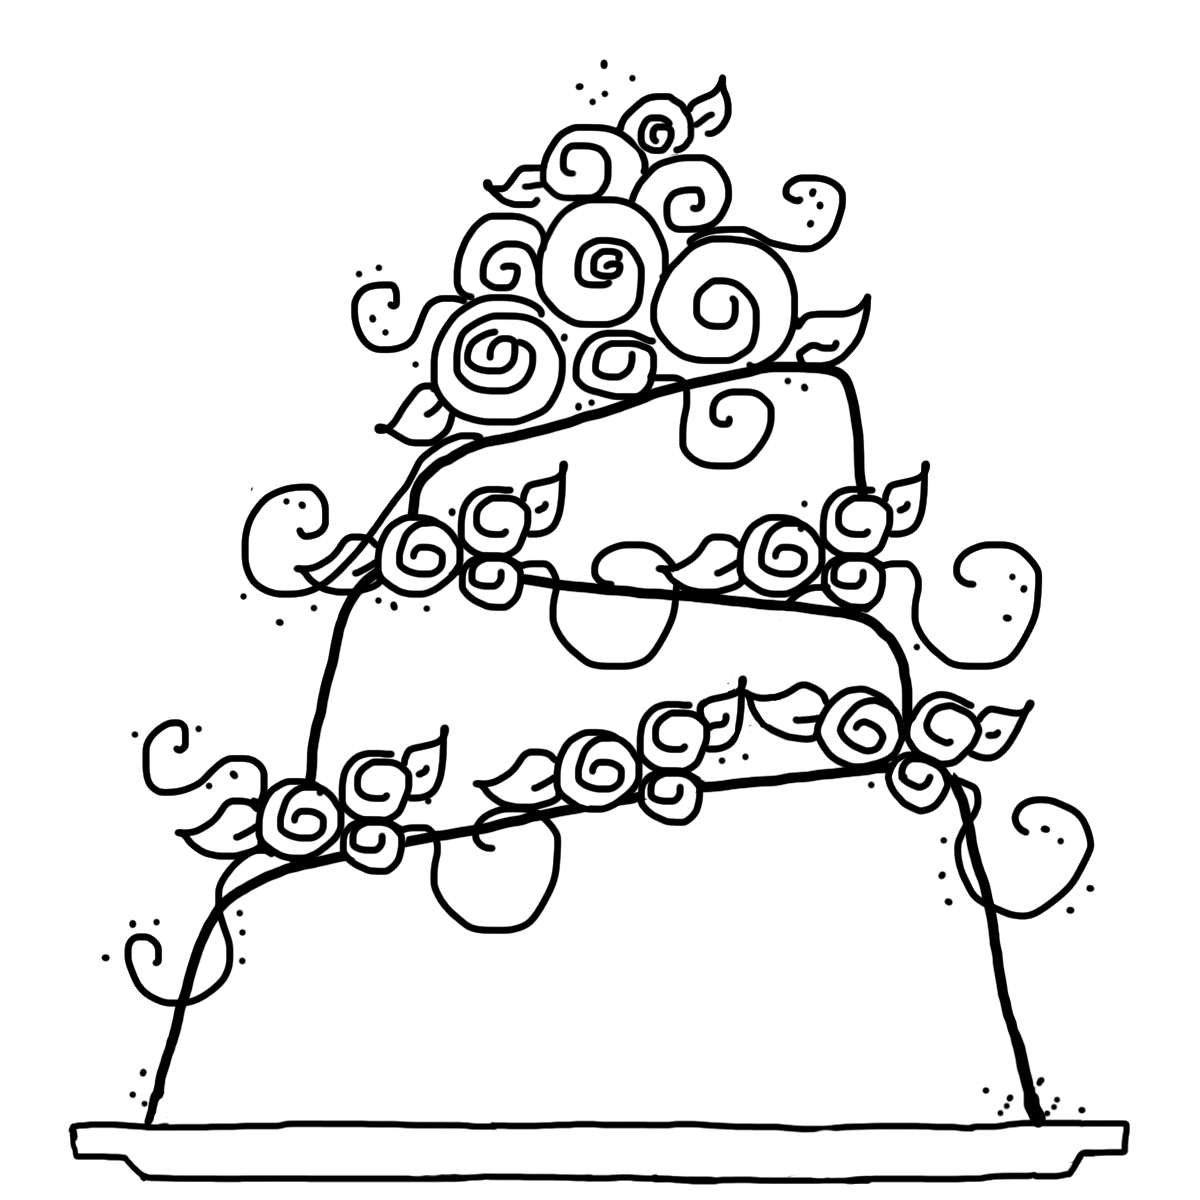 20 Free Pictures for: Wedding Coloring Pages. Temoon.us